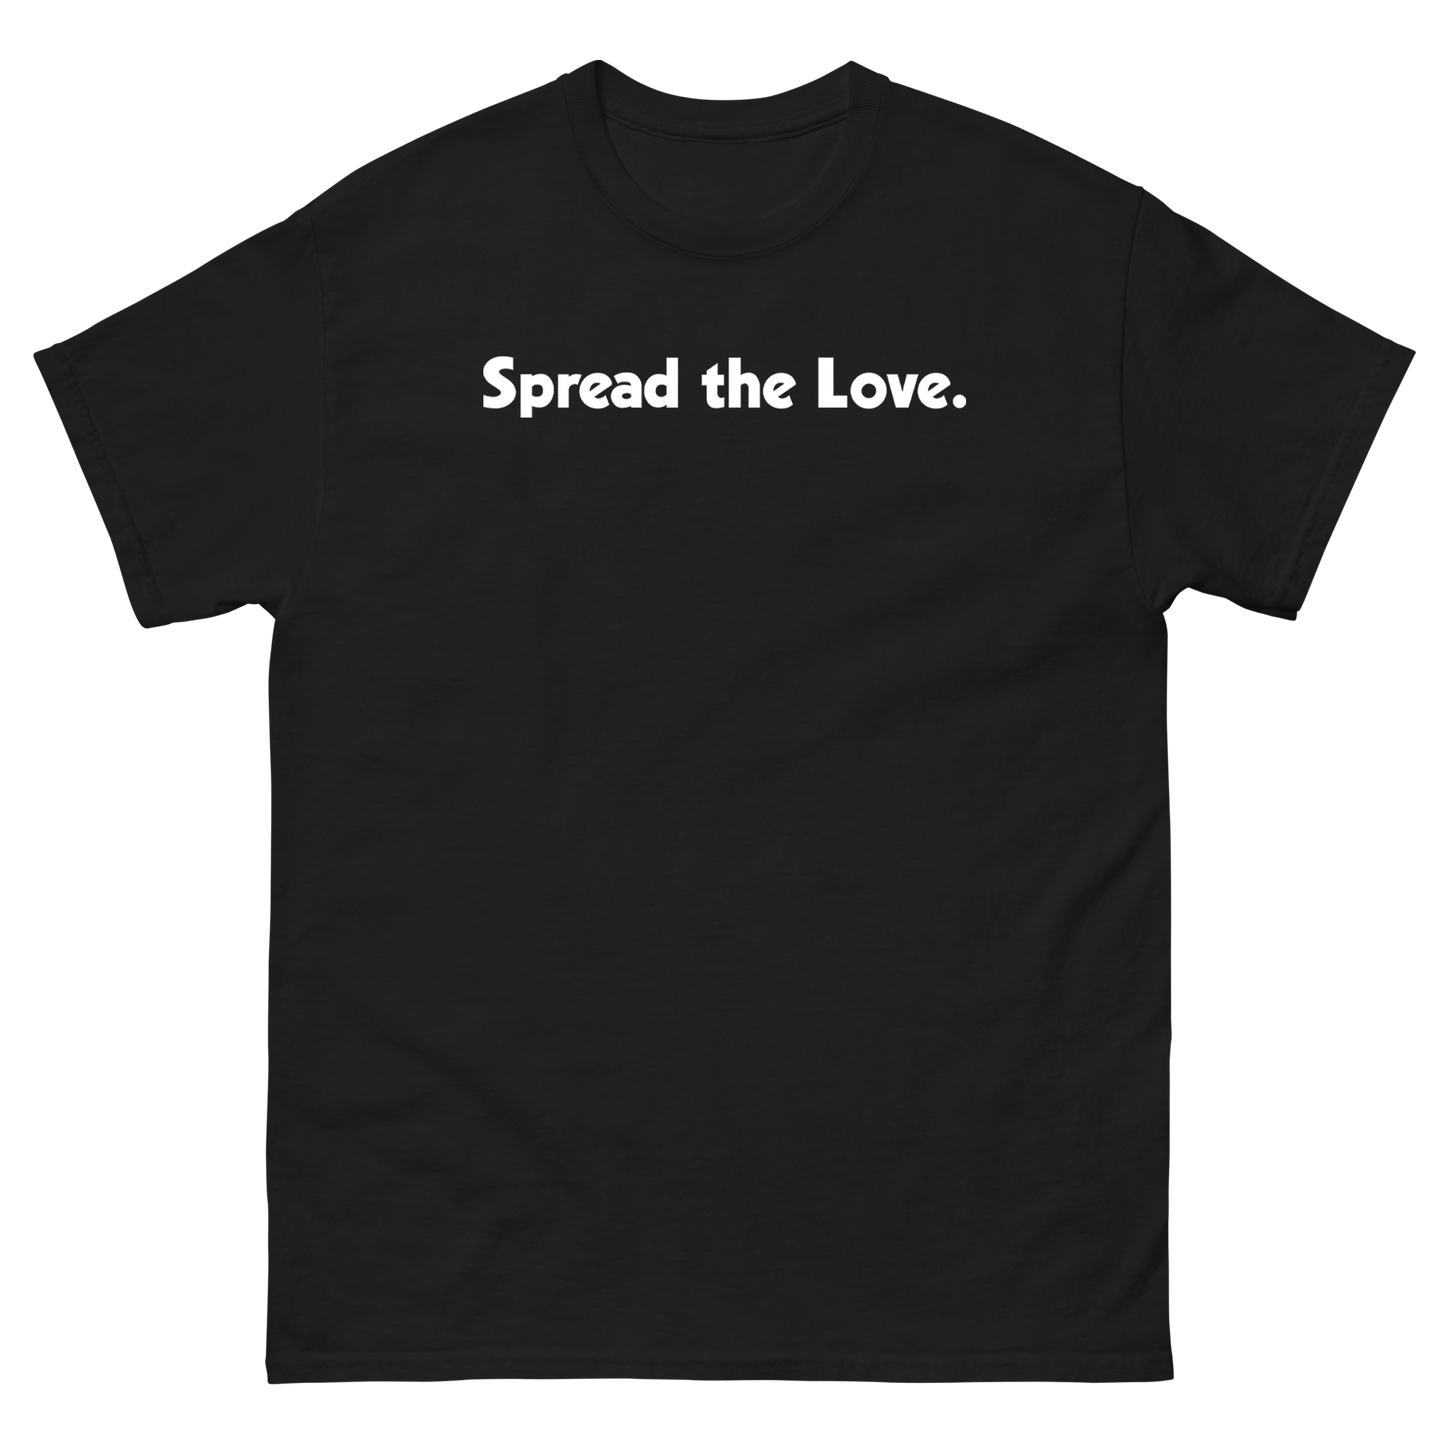 Spread the Love T-Shirt